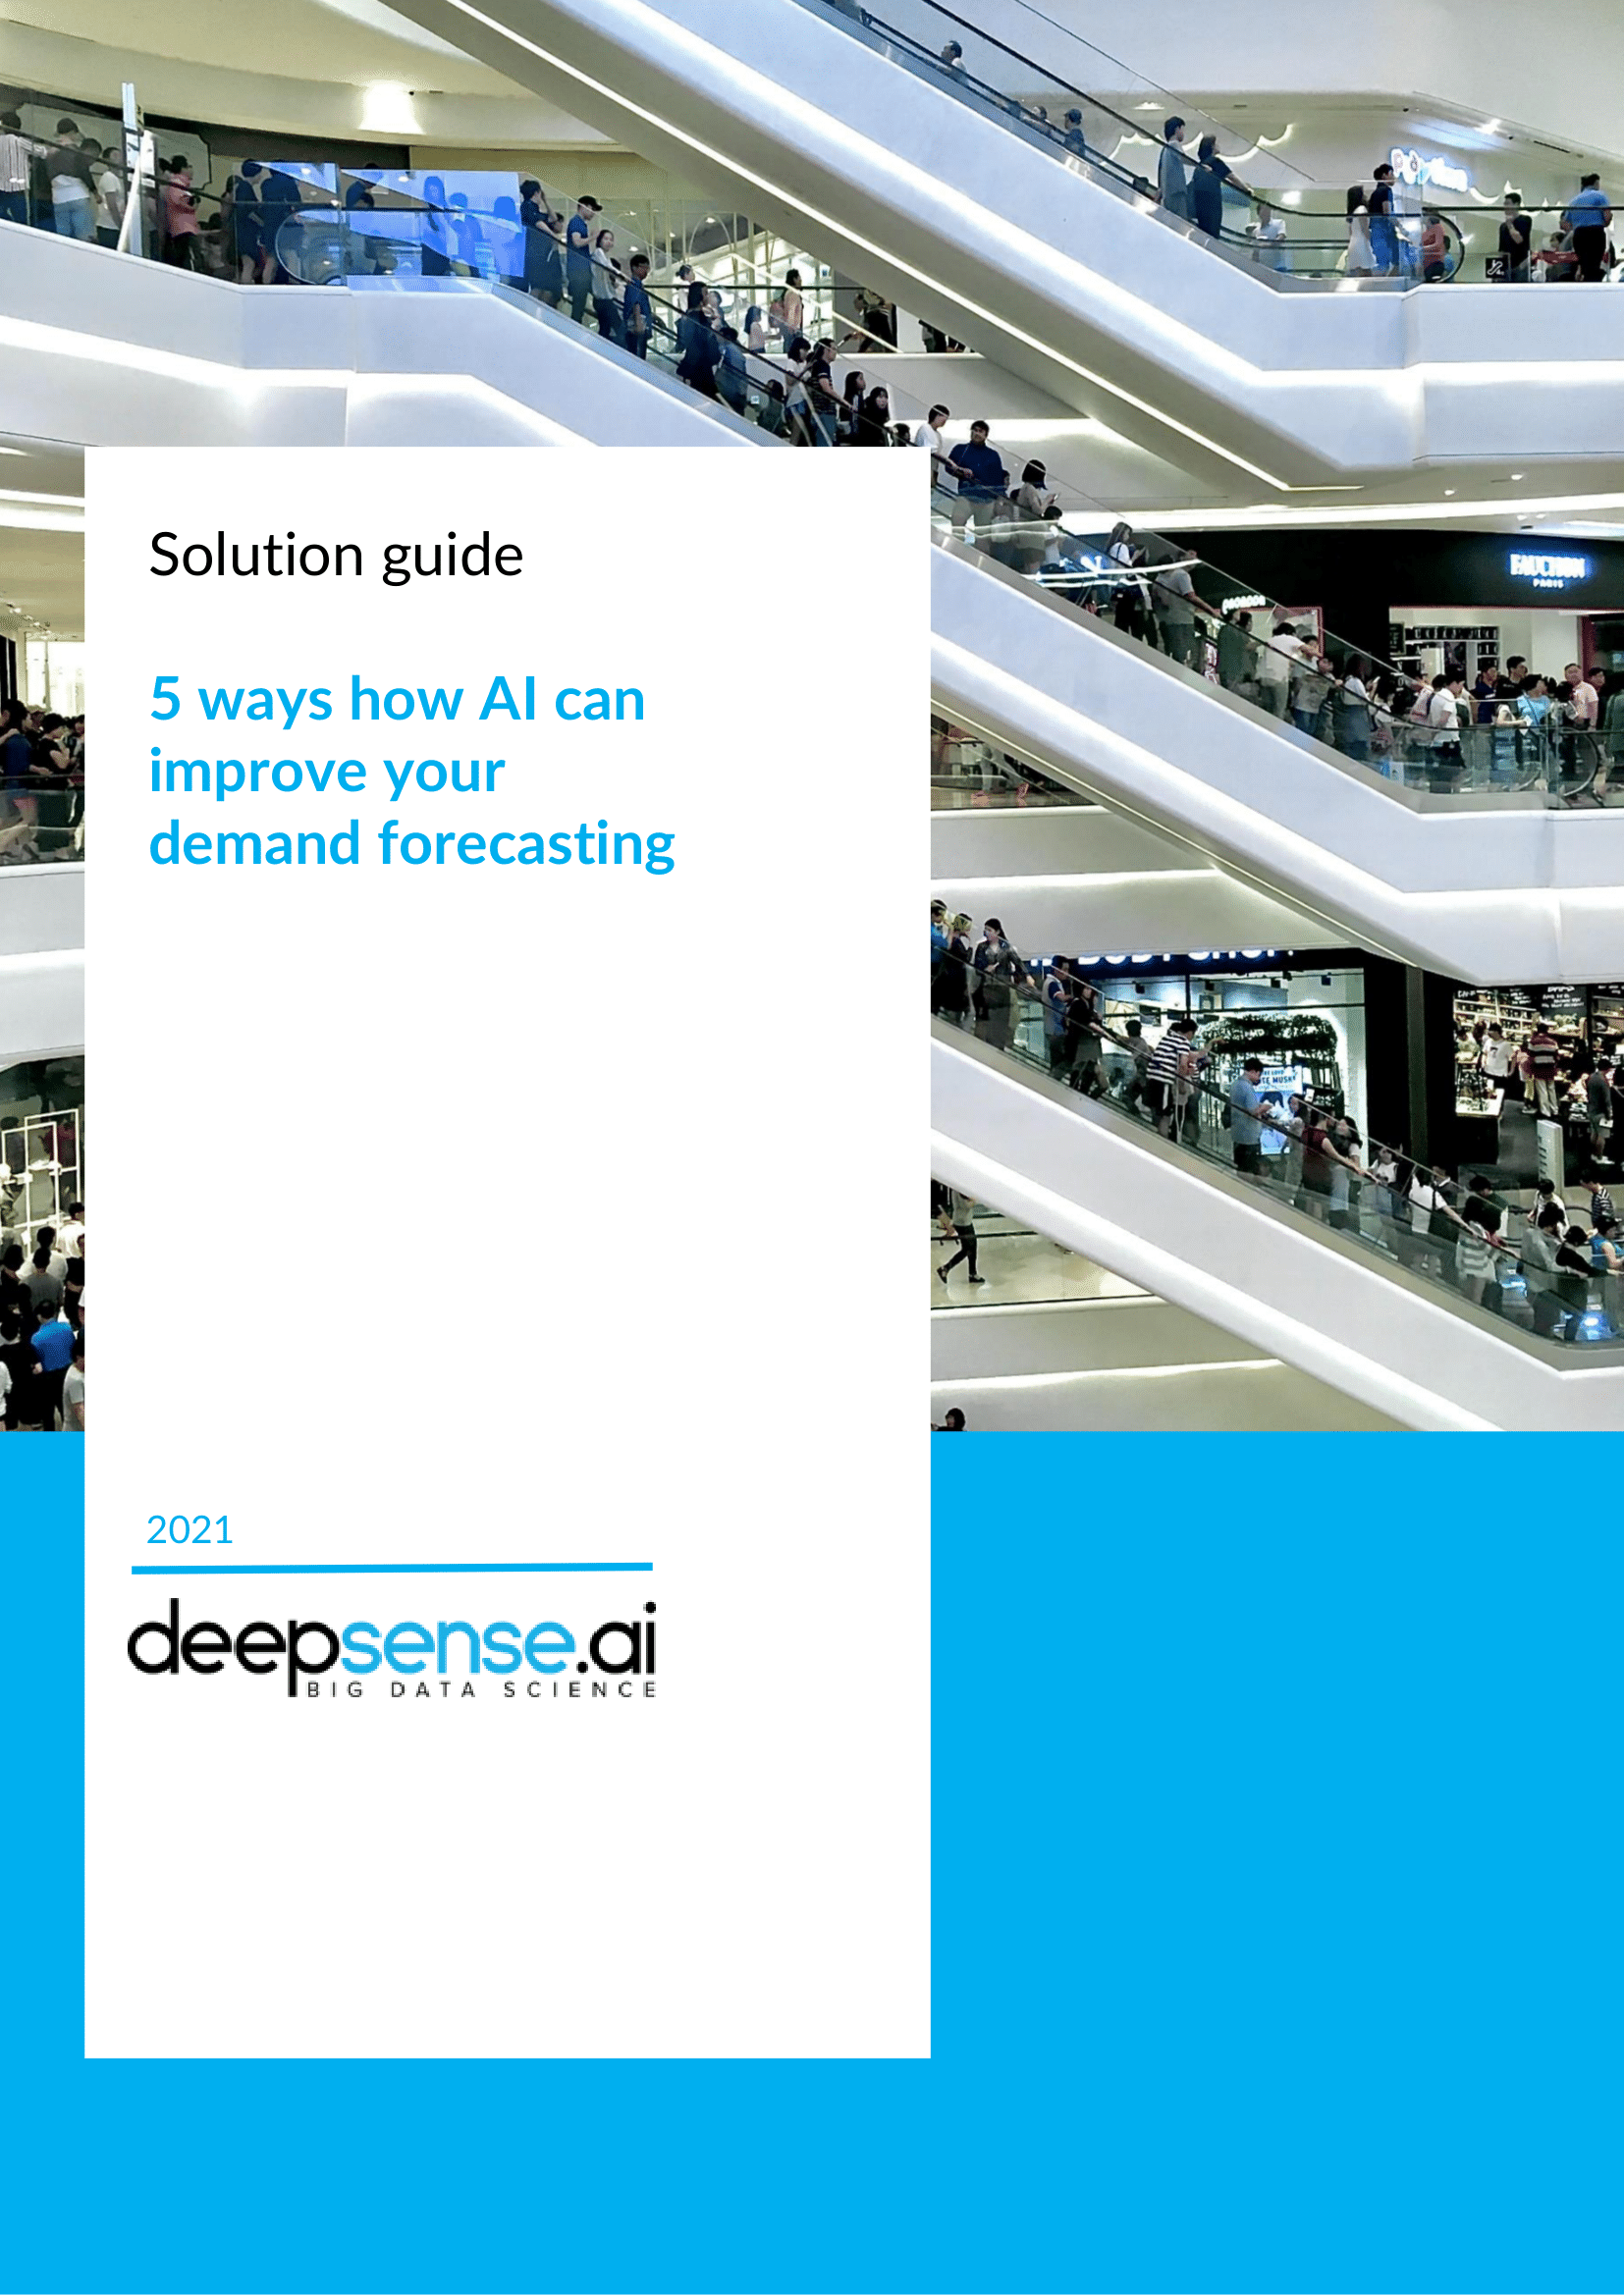 5 ways how AI can improve your demand forecasting